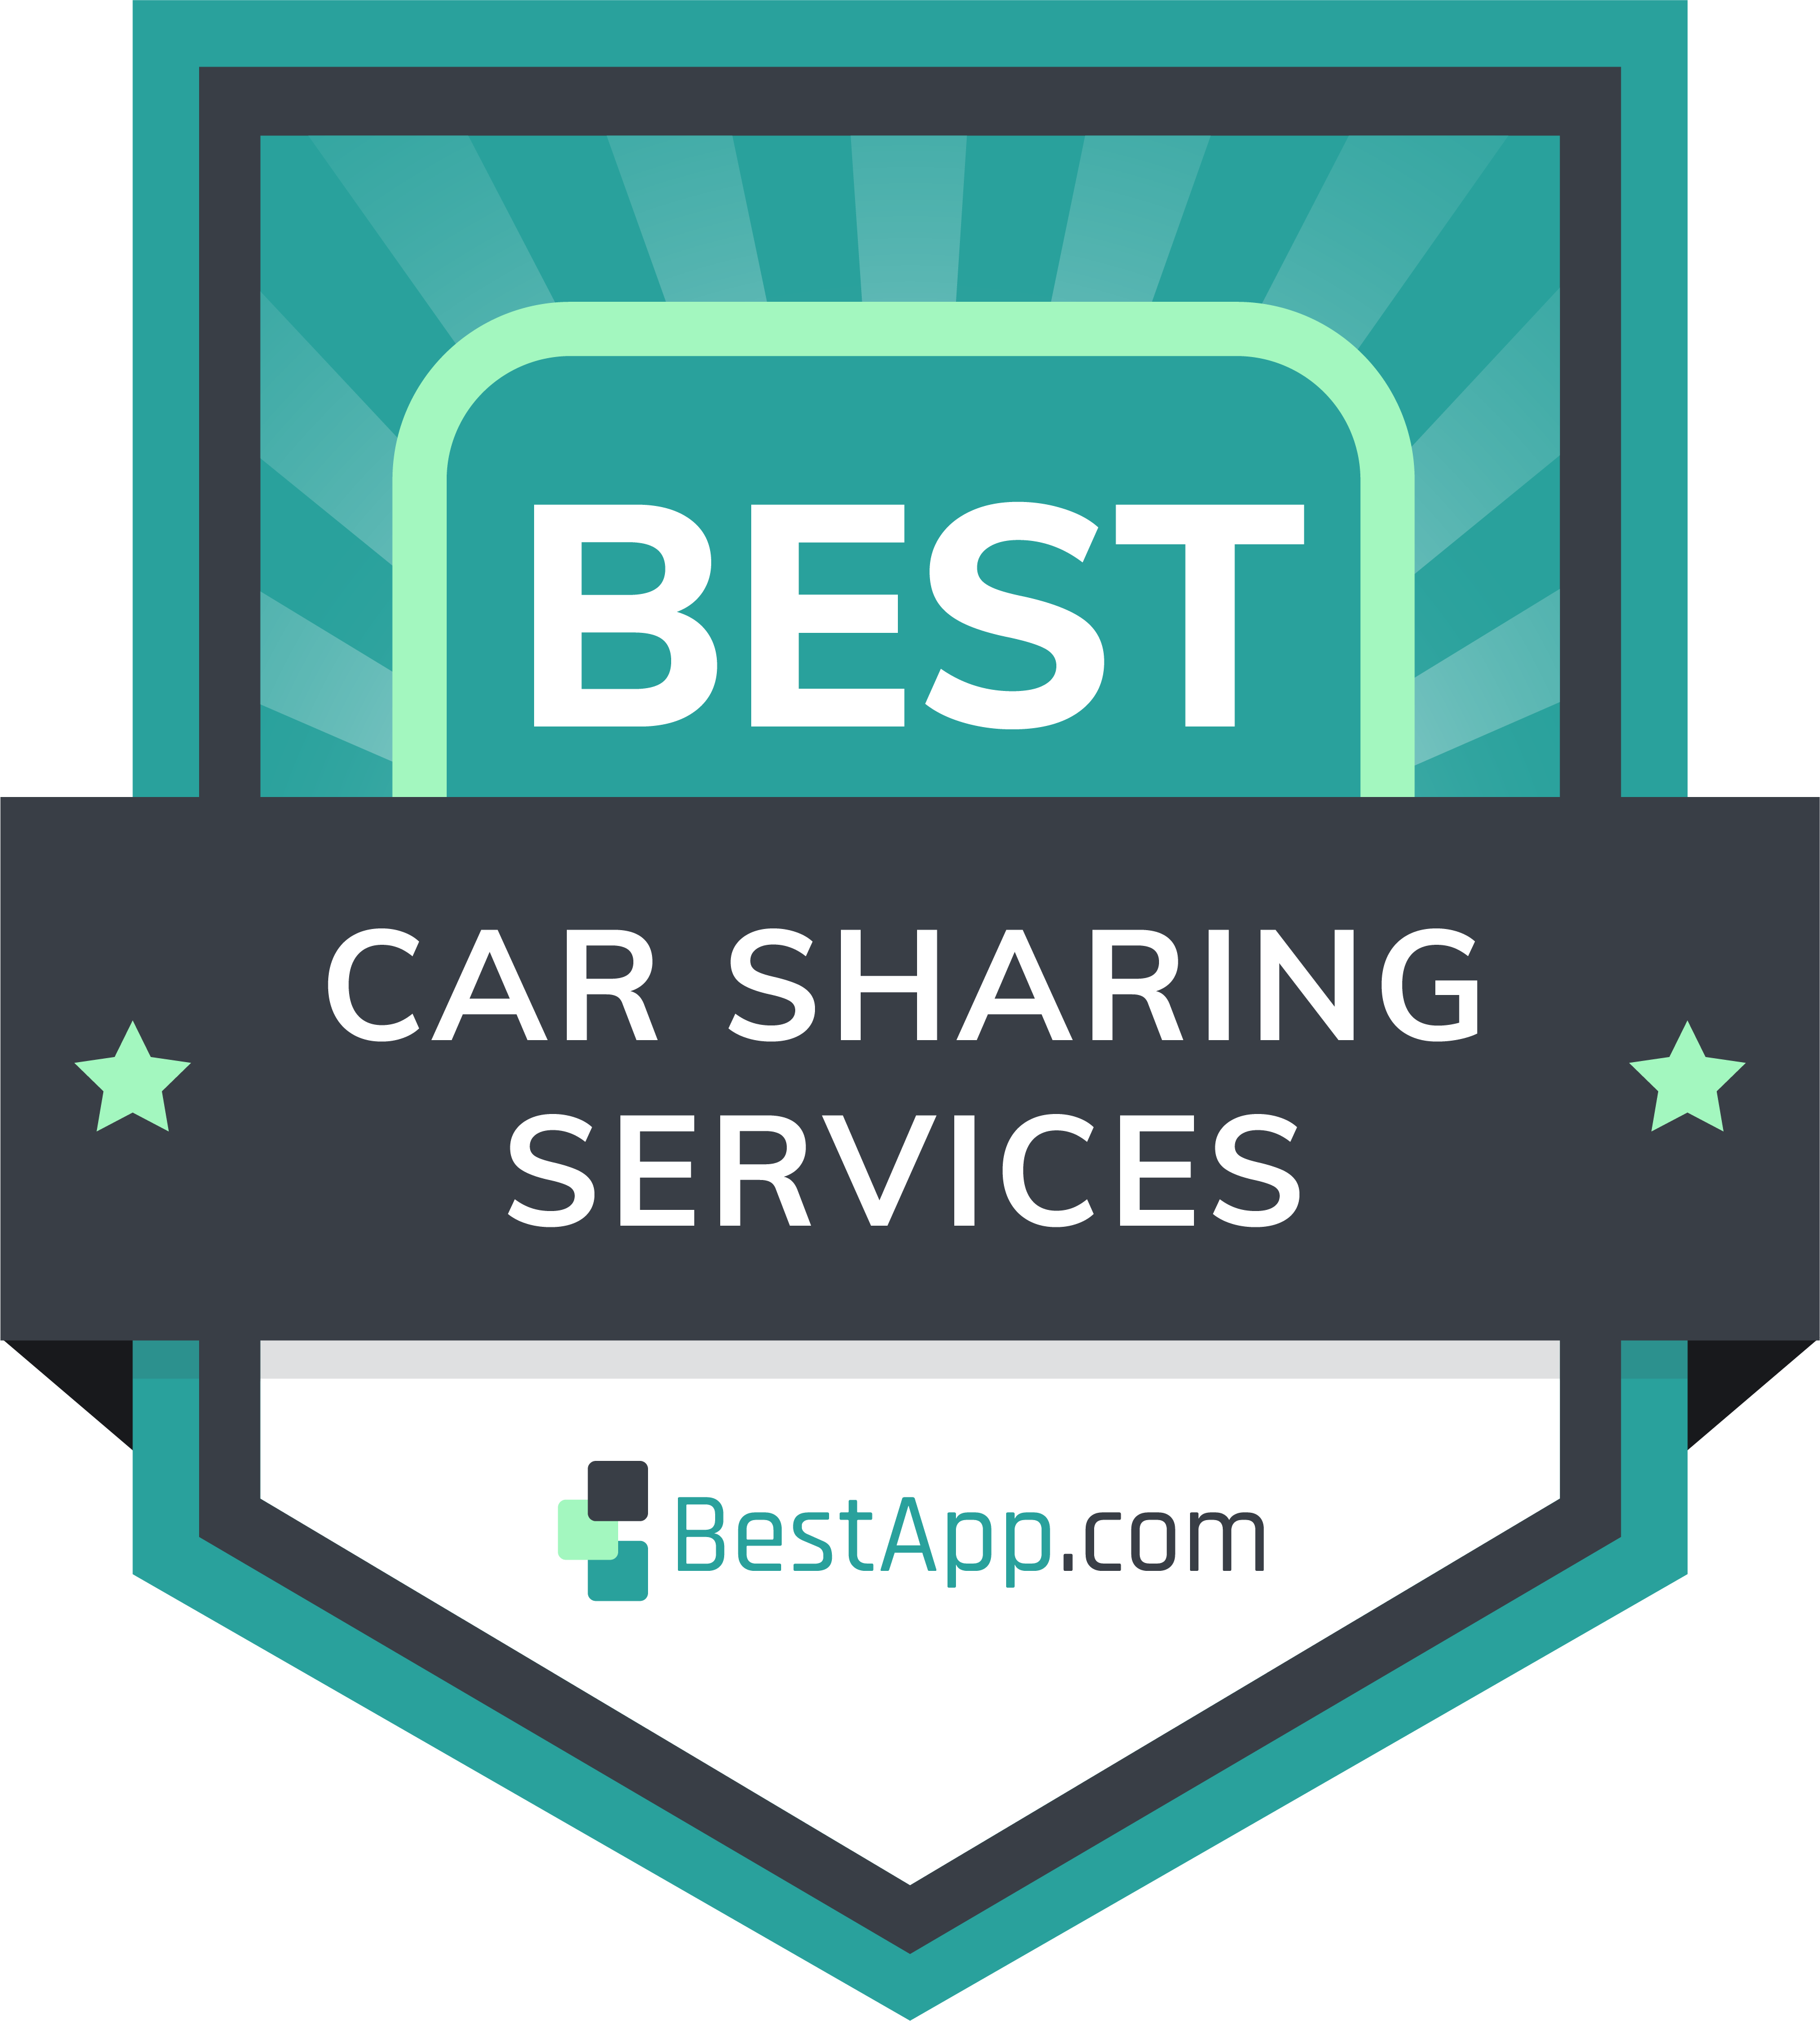 Best Car Sharing Services Badge